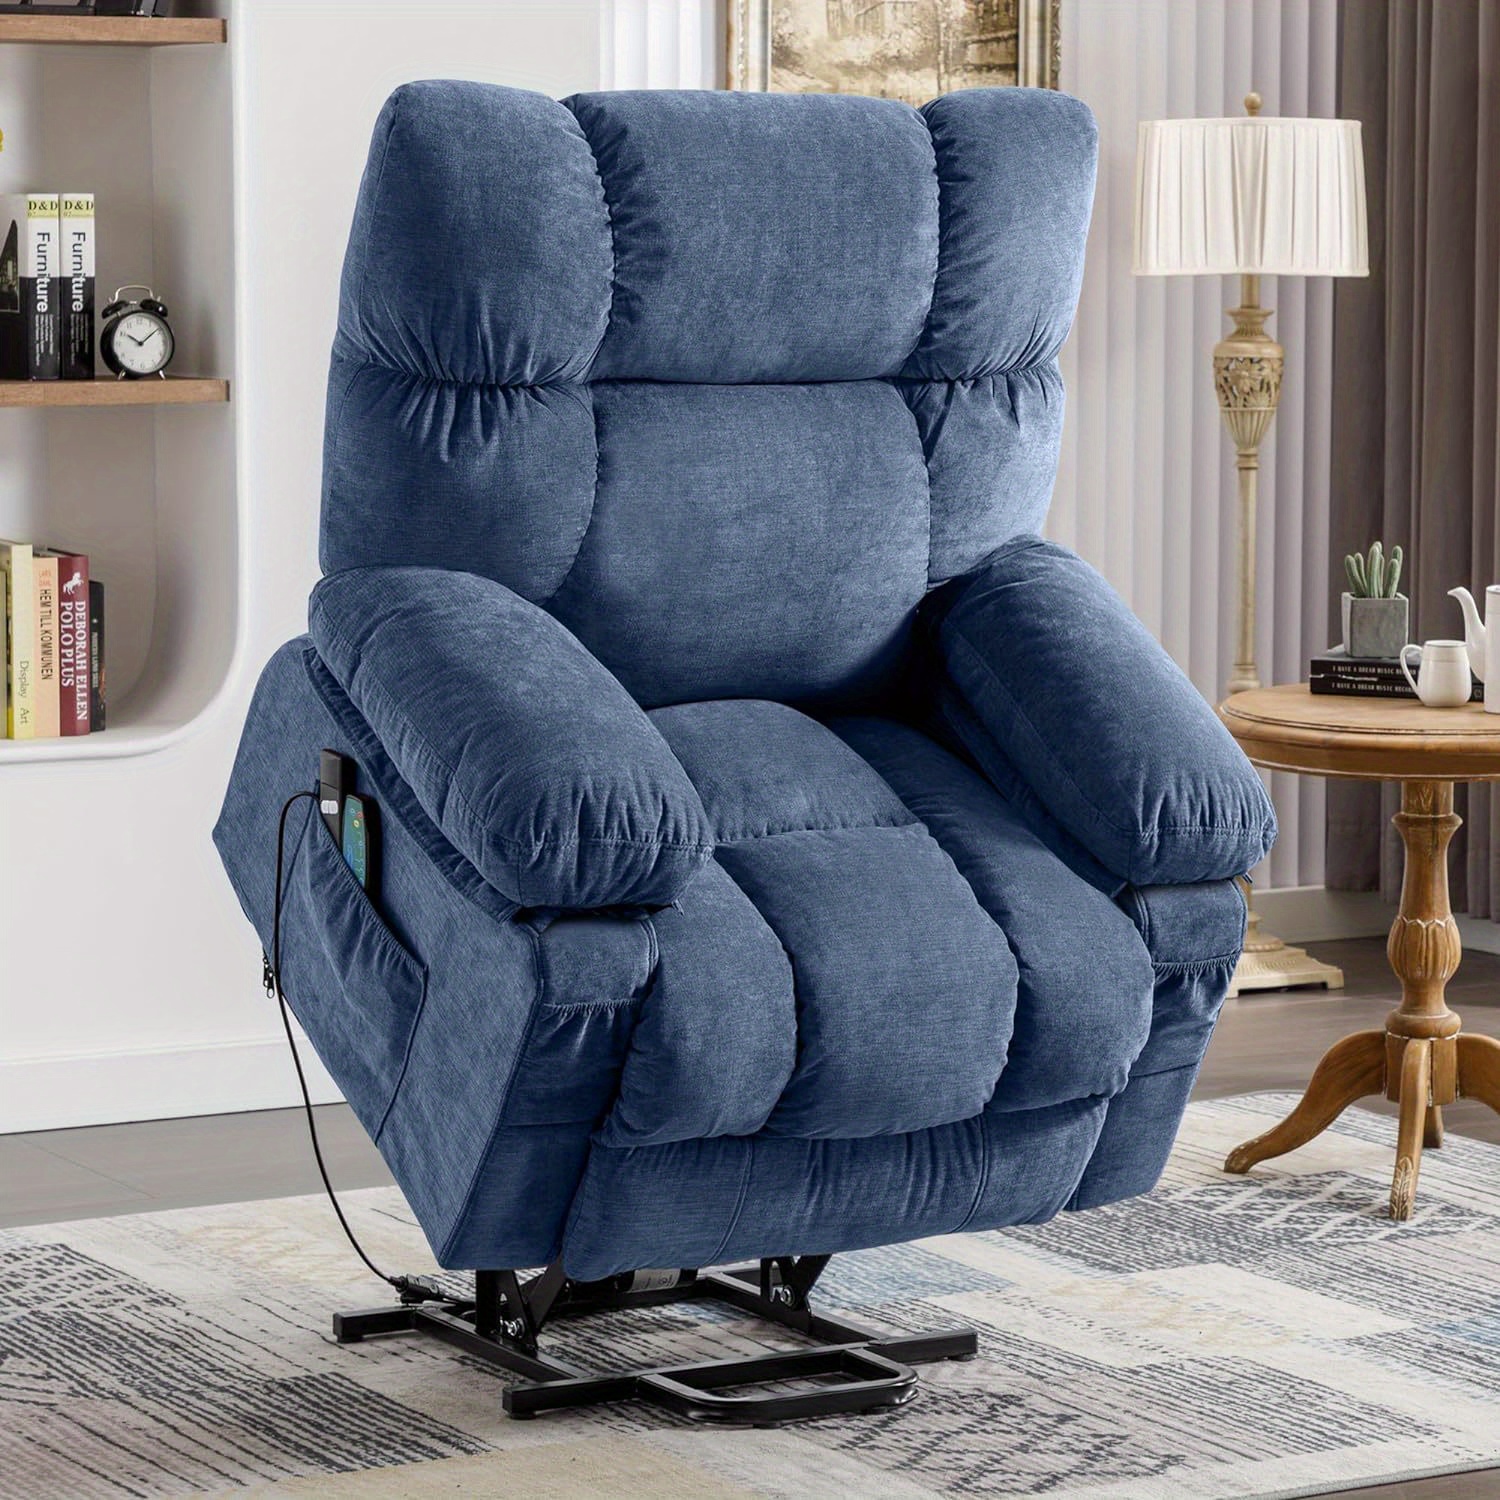 

Recliner Chairs Modern Chair With Heat And Massage Lift Chair Recliners For Elderly Recliner Sofa, Usb Port Remote Control, Adjustable Furniture